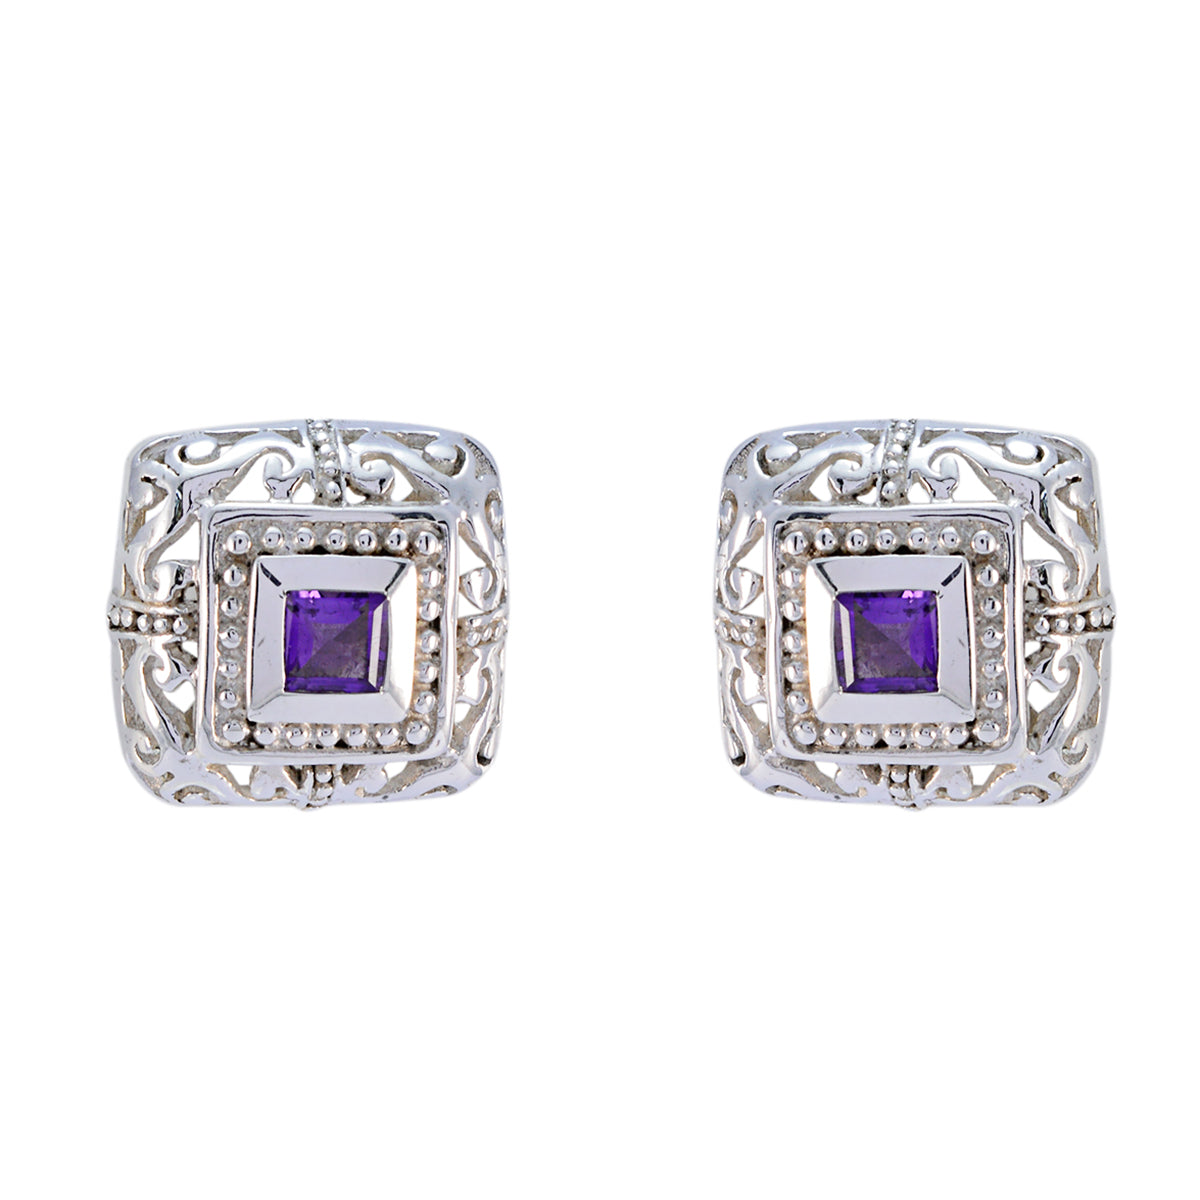 Riyo Good Gemstones square Faceted Purple Amethyst Silver Earrings gift for mother